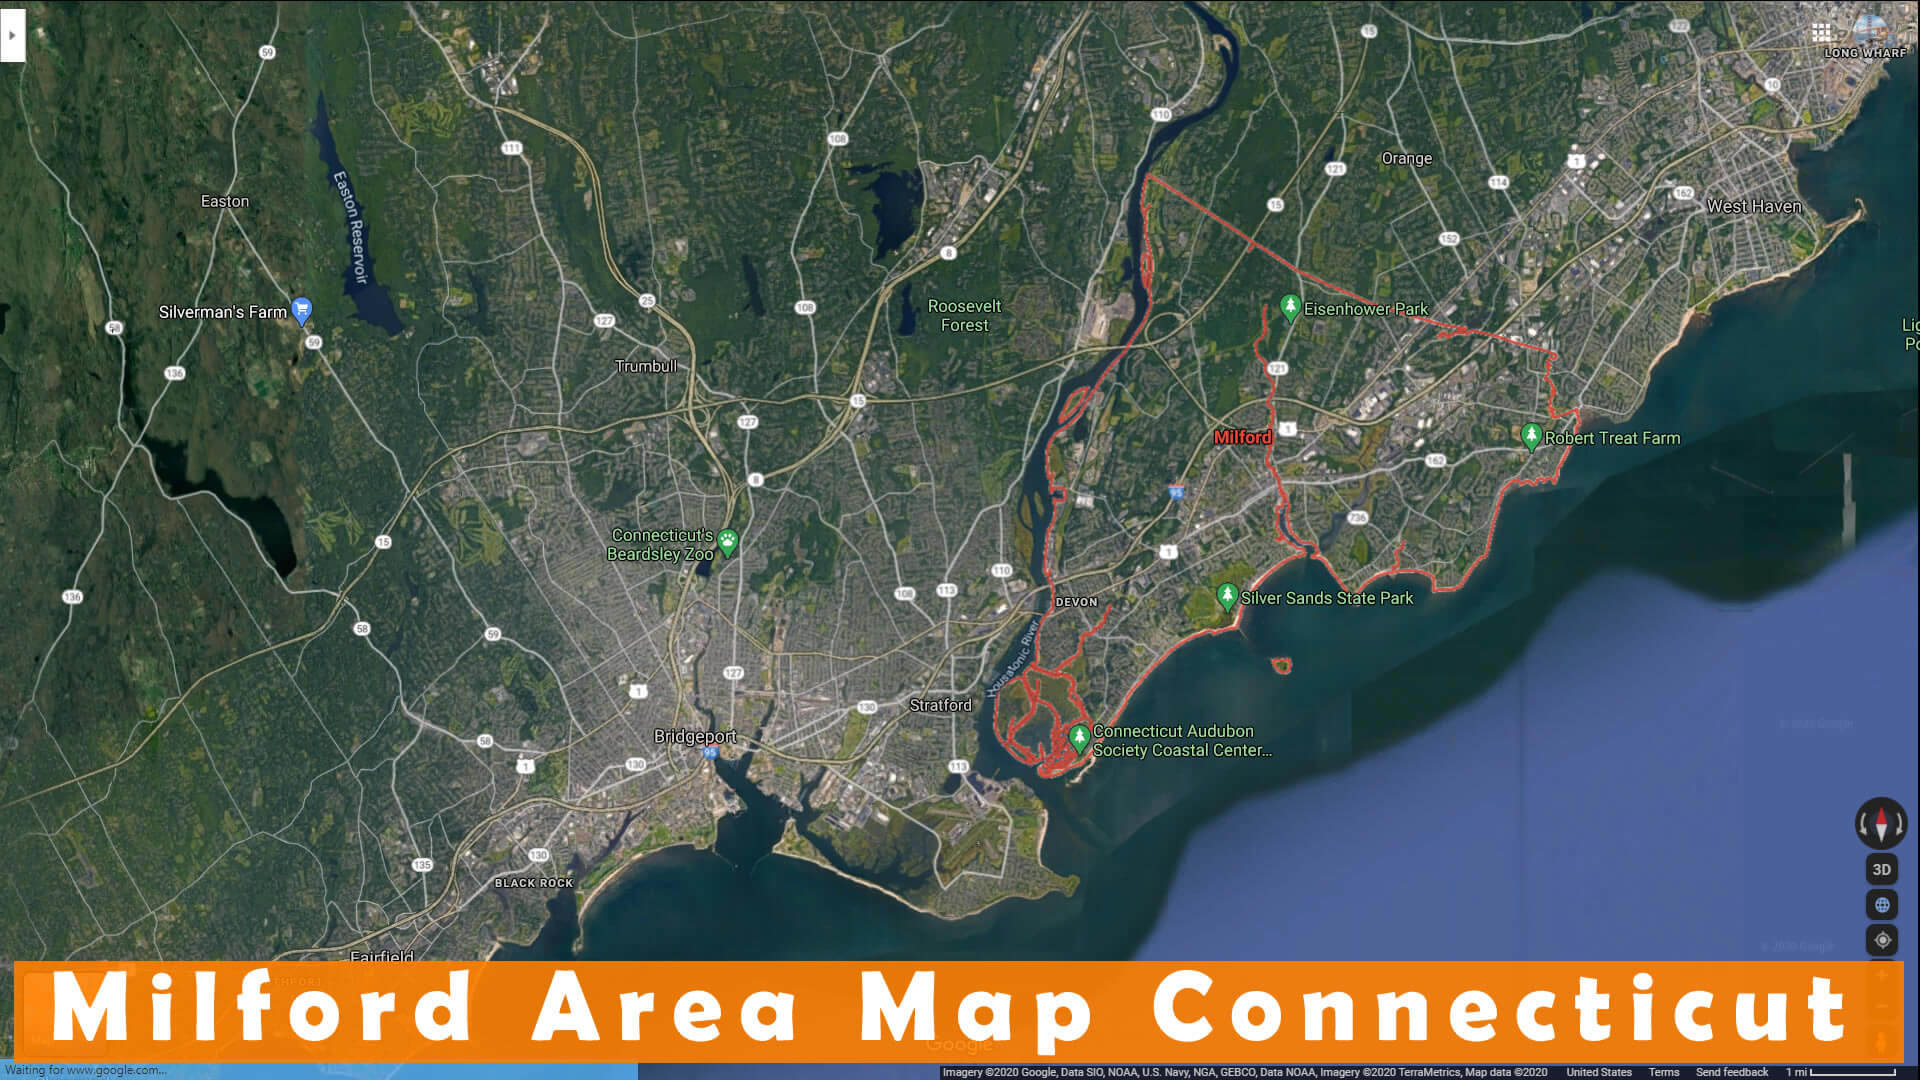 Milford Area Map Connecticut